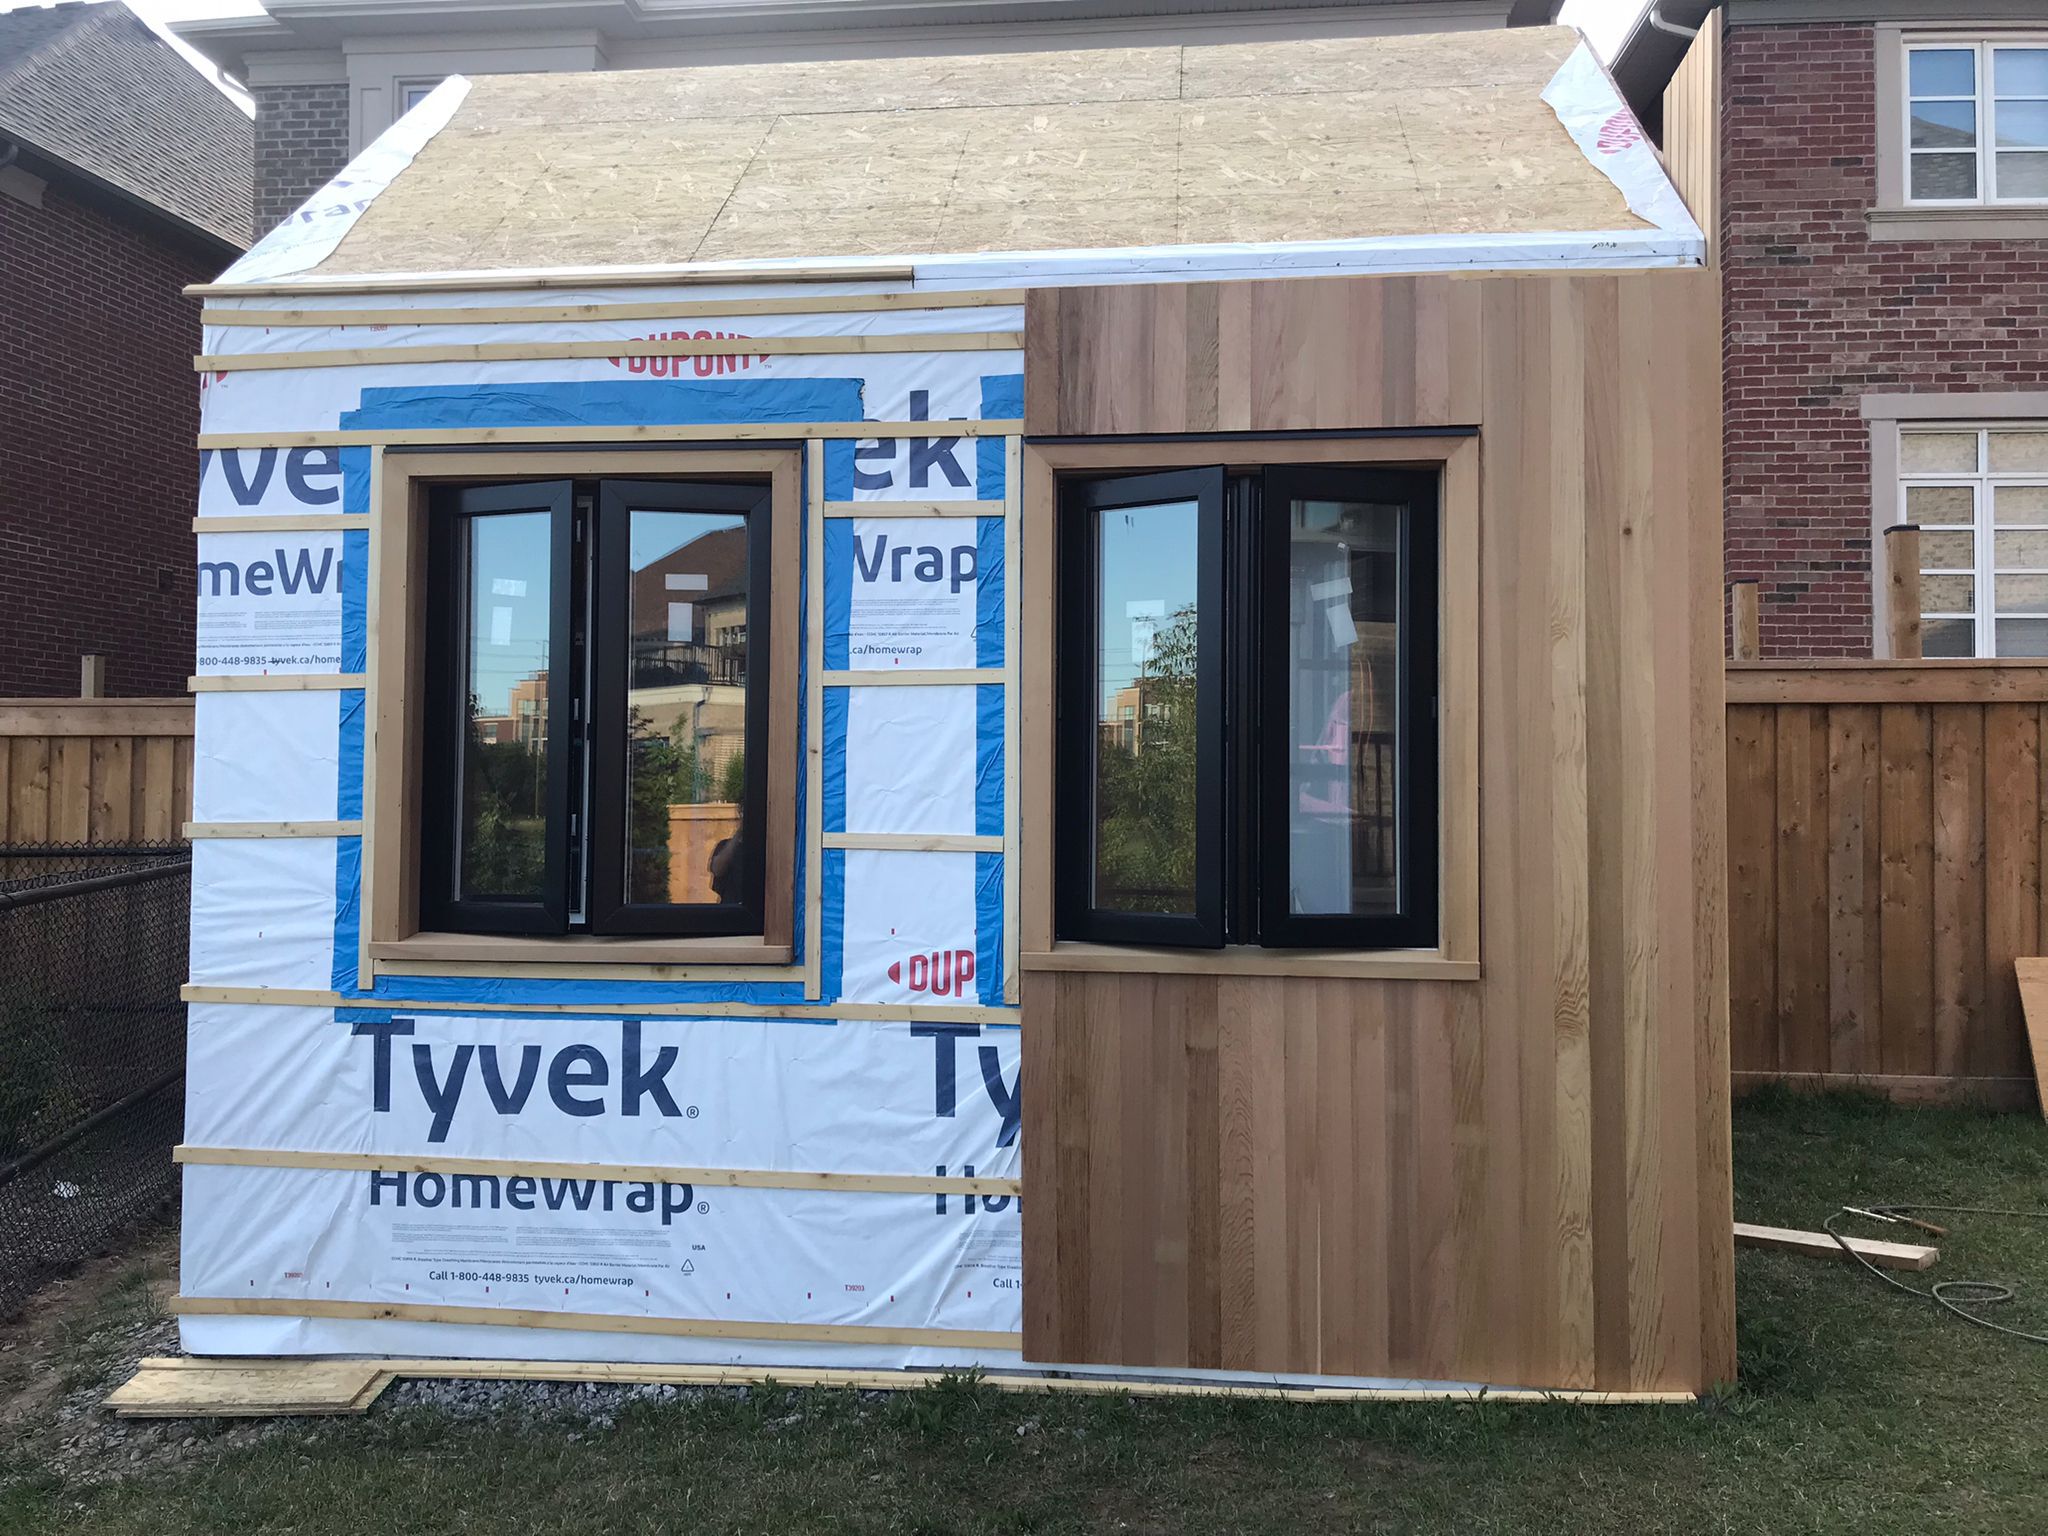 Side view of 9' x 12' Mini Oban Home Studio located in Oakville, Ontario – Summerwood Products